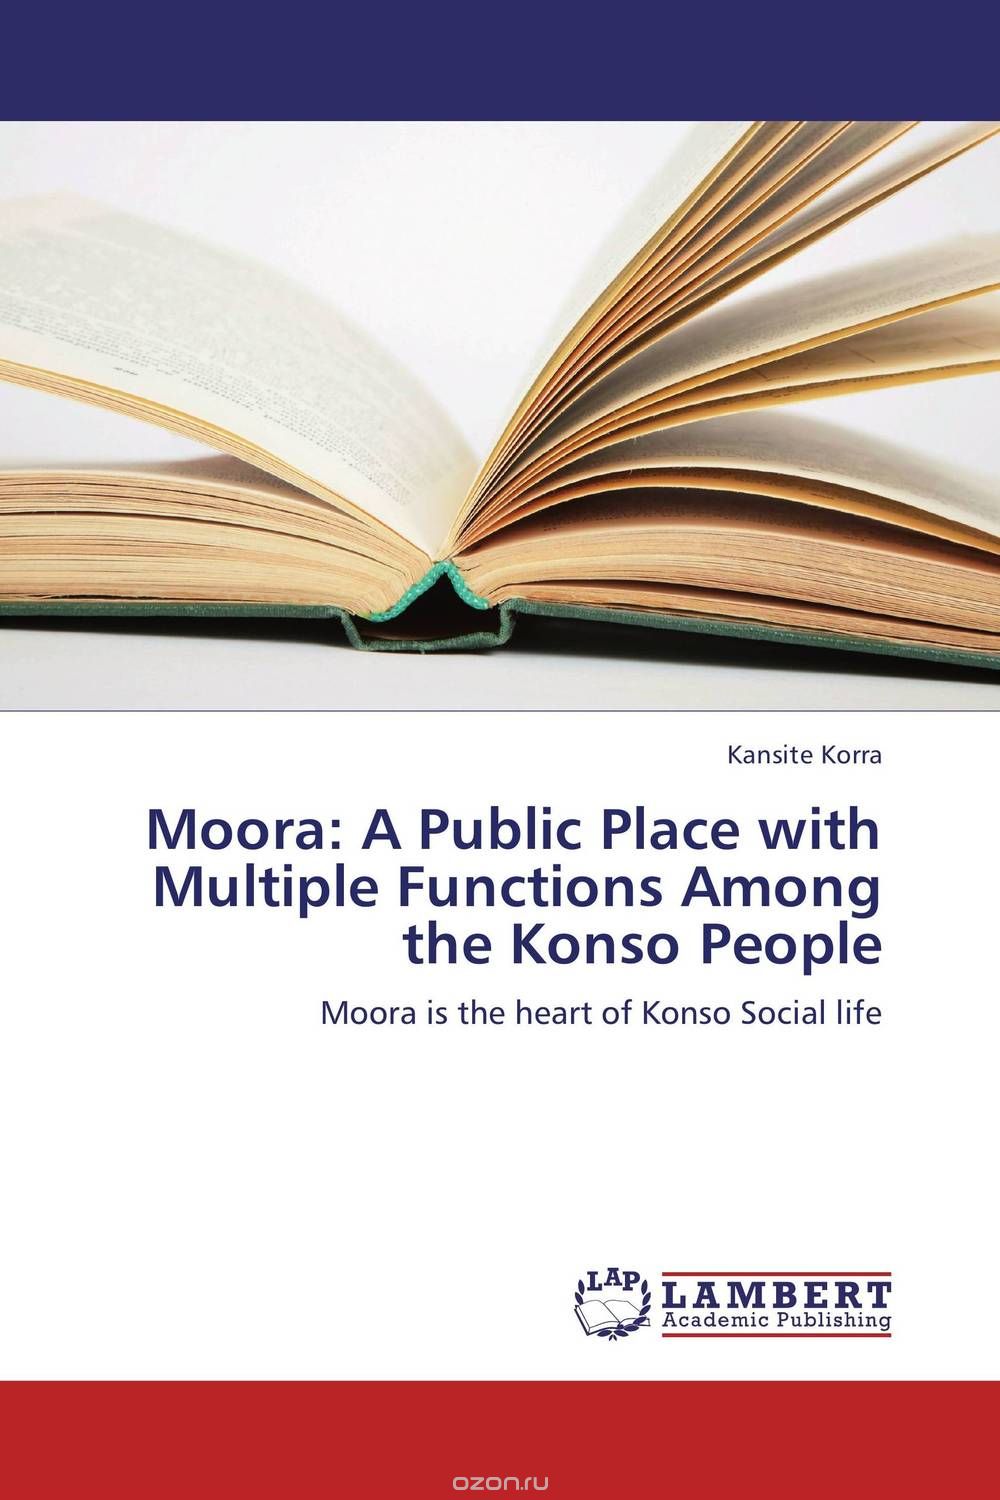 Moora: A Public Place with Multiple Functions Among the Konso People